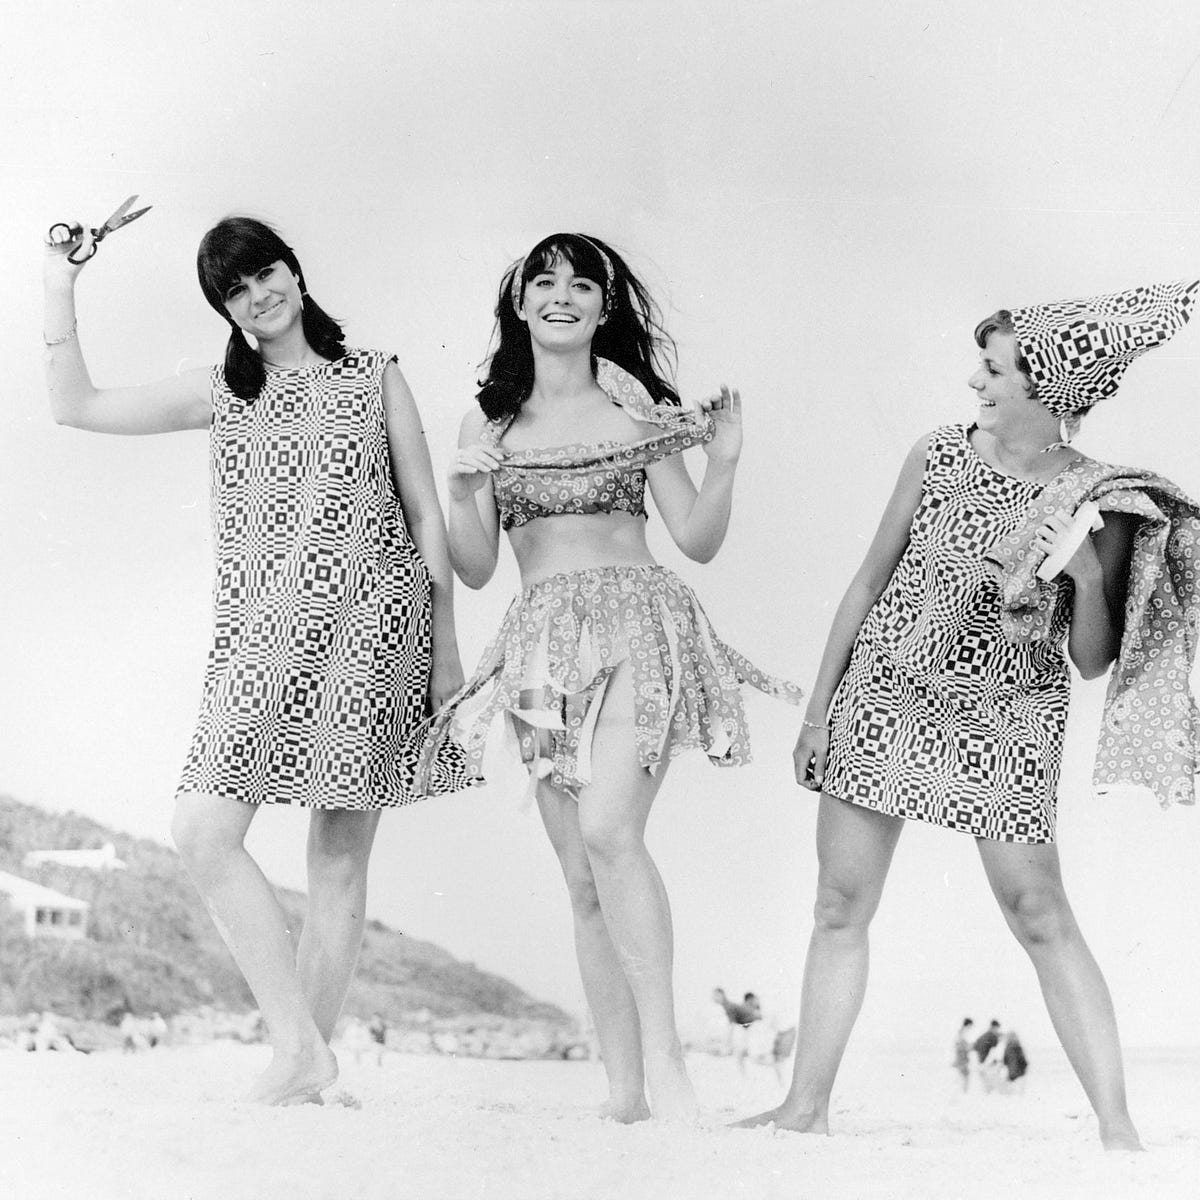 This wild paper clothing trend of the 1960s early version of fast fashion | by Buck | Timeline